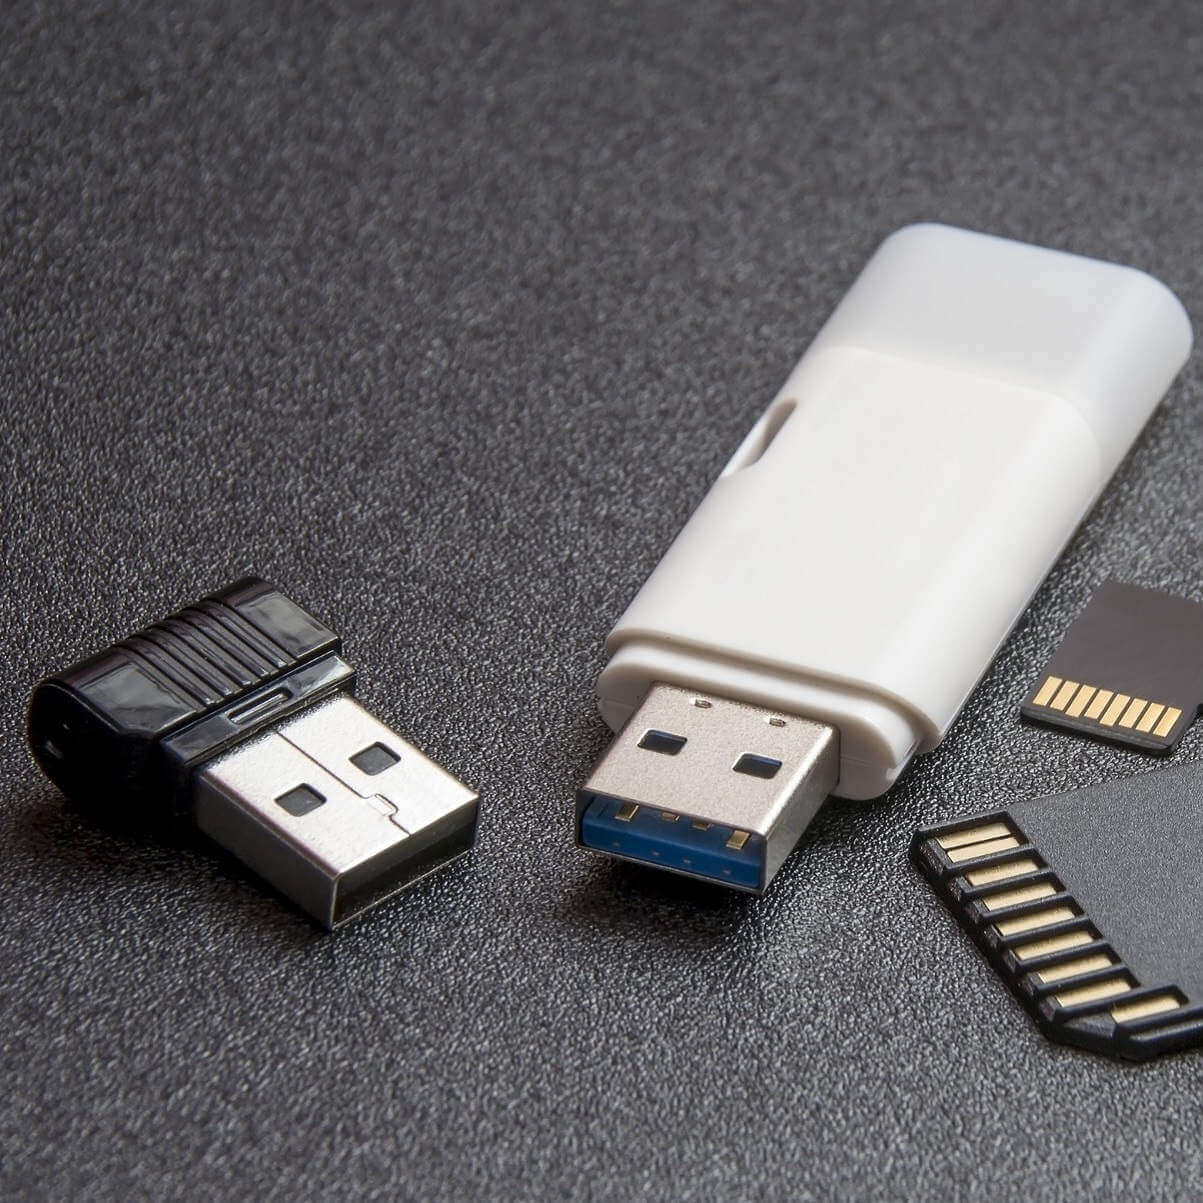 4 Best Data Recovery software USB